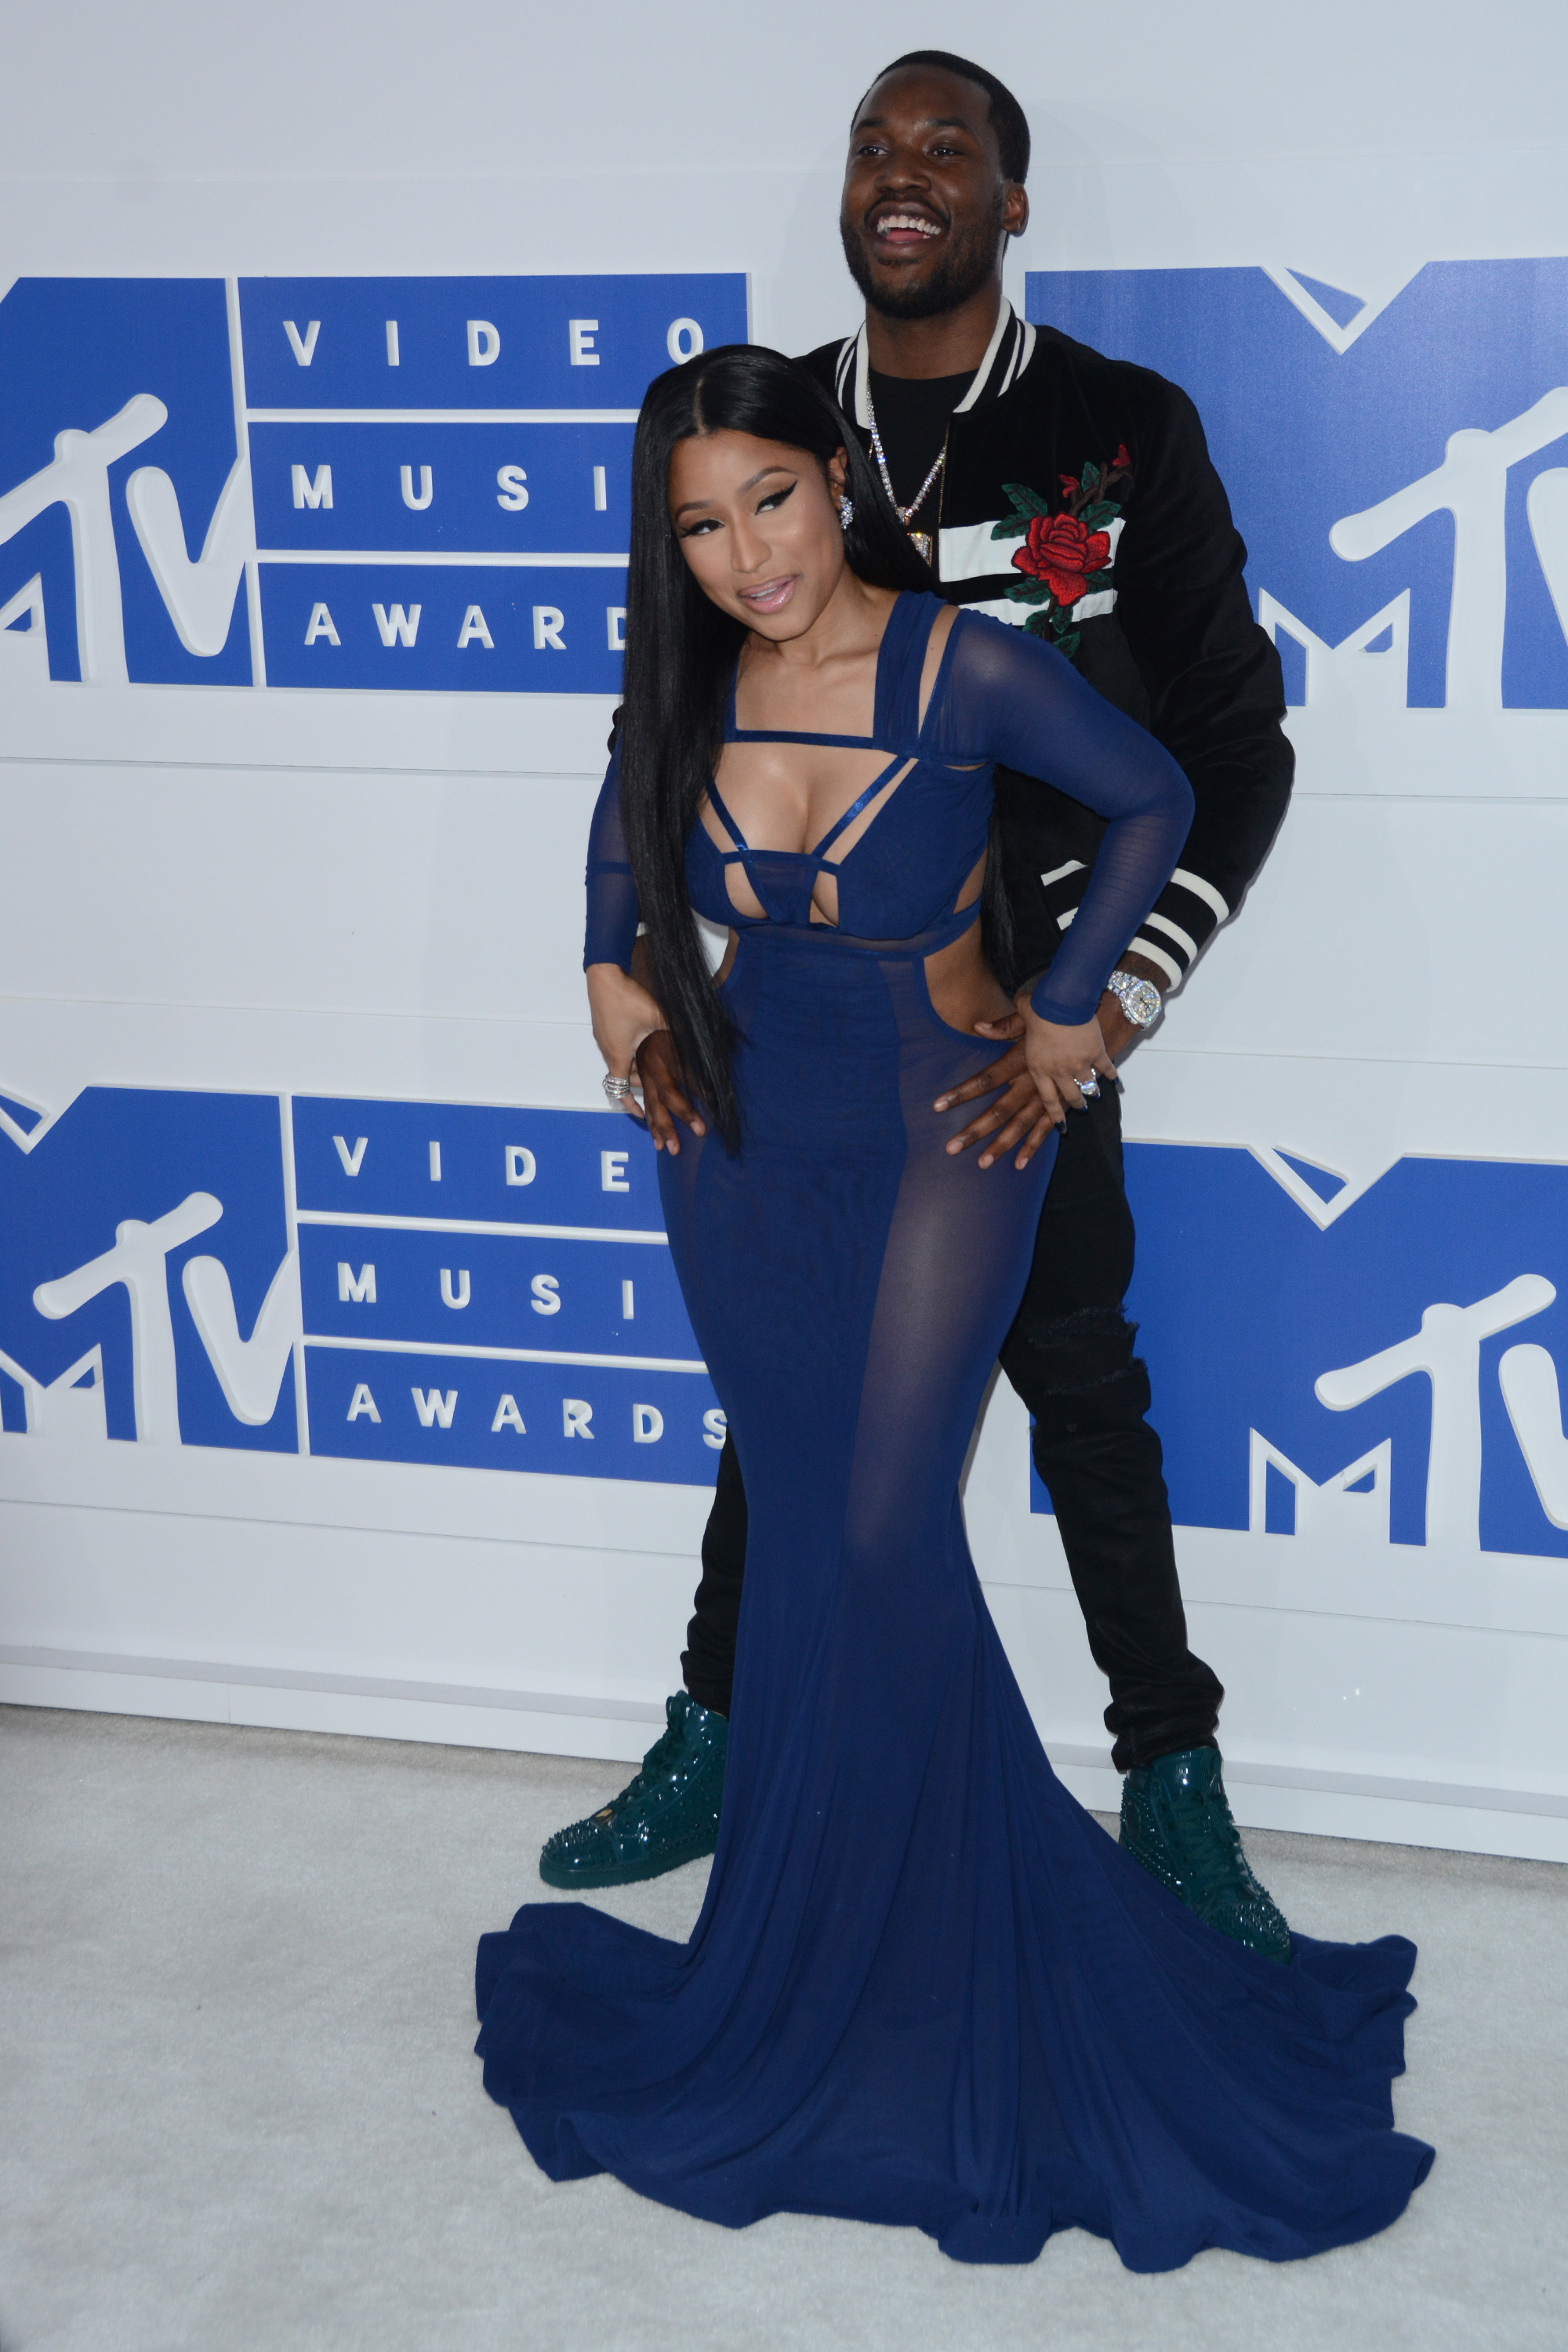 Nicki Minaj and Meek Mill on How to Deal with Haters